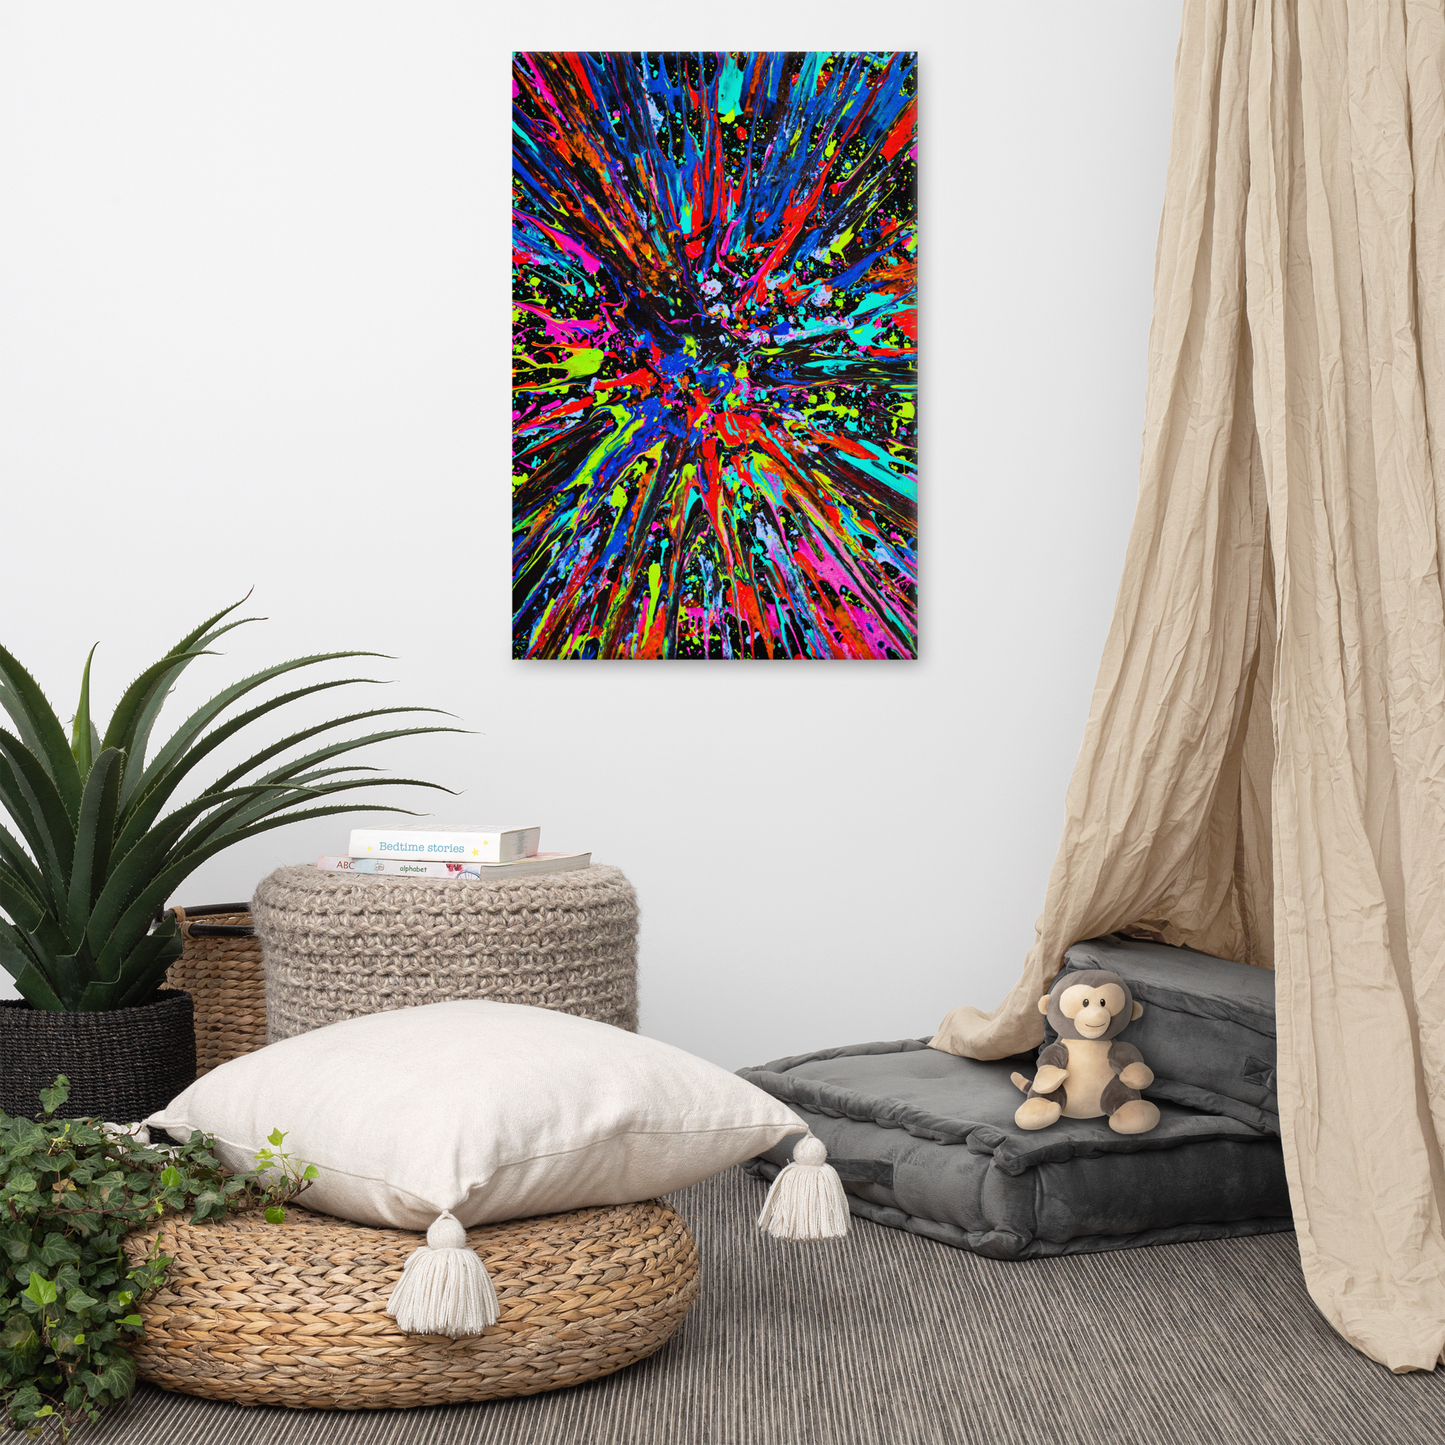 NightOwl Studio Abstract Wall Art, Splatter, Boho Living Room, Bedroom, Office, and Home Decor, Premium Canvas with Wooden Frame, Acrylic Painting Reproduction, 24” x 36”